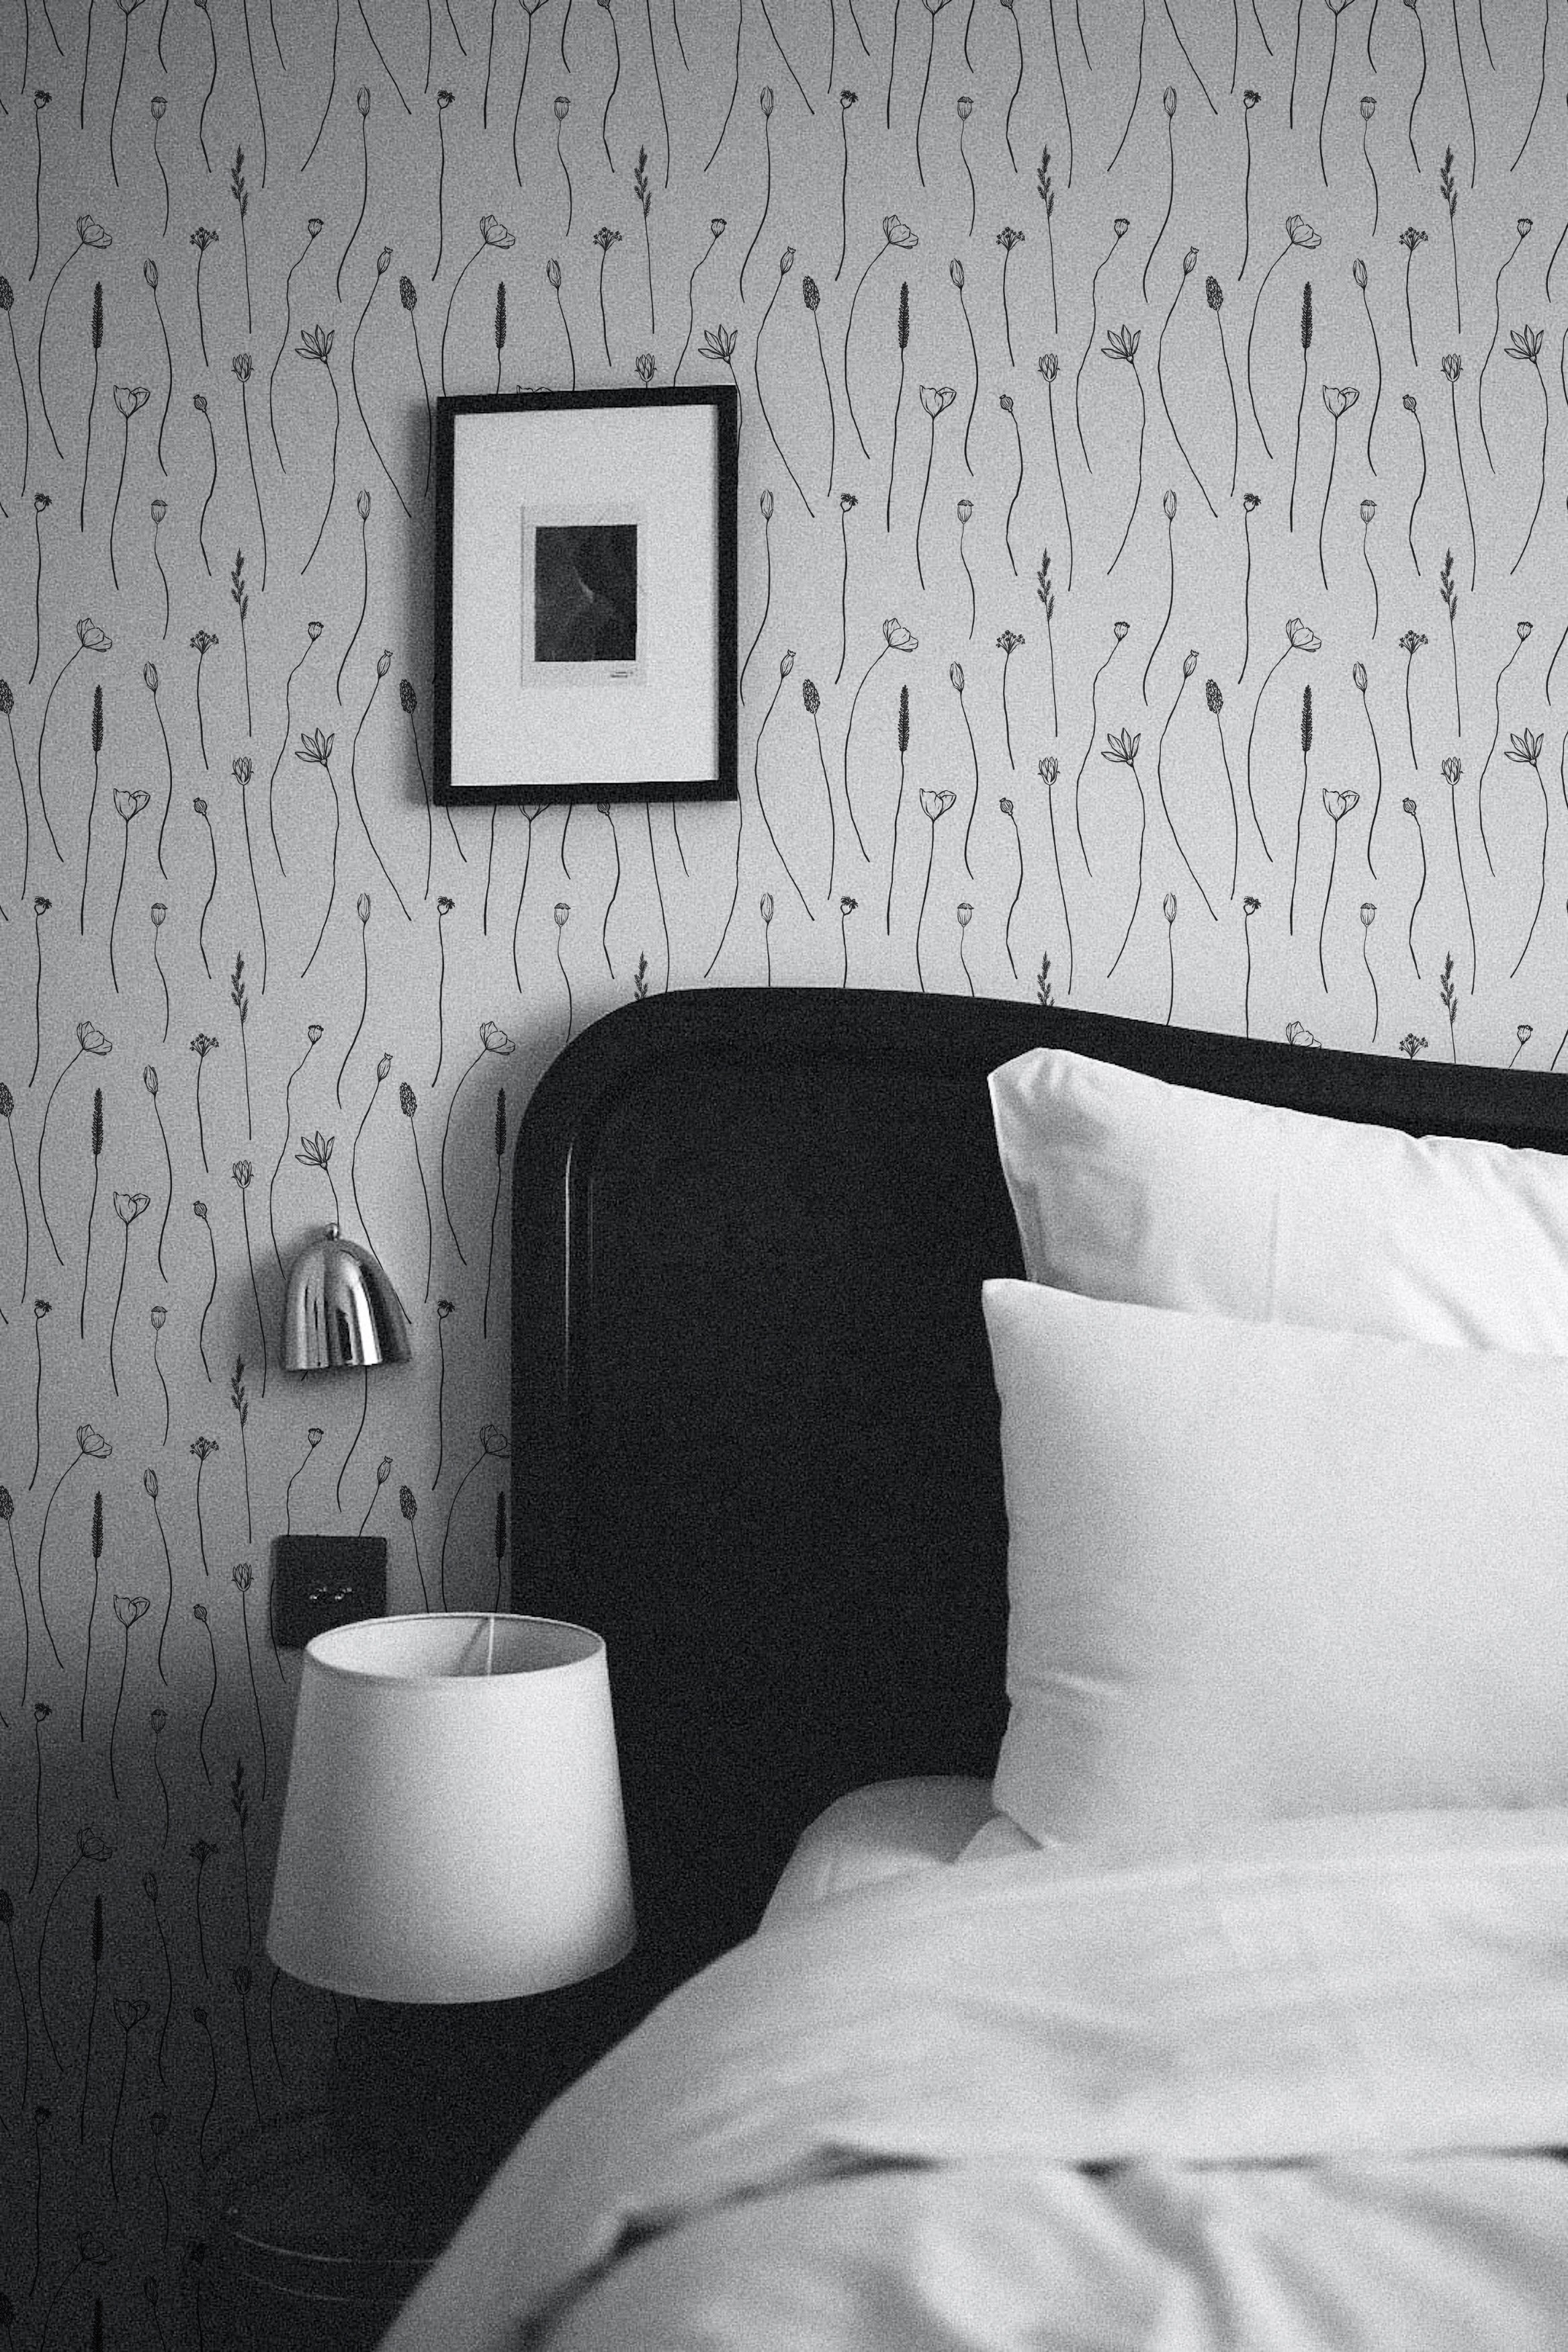 A stylish bedroom featuring the 'Wildflower Sketch Wallpaper' as a main decor element behind a classic black headboard. The wallpaper's subtle floral patterns add a touch of elegance and tranquility to the room, harmonizing with the simple and modern furnishings.